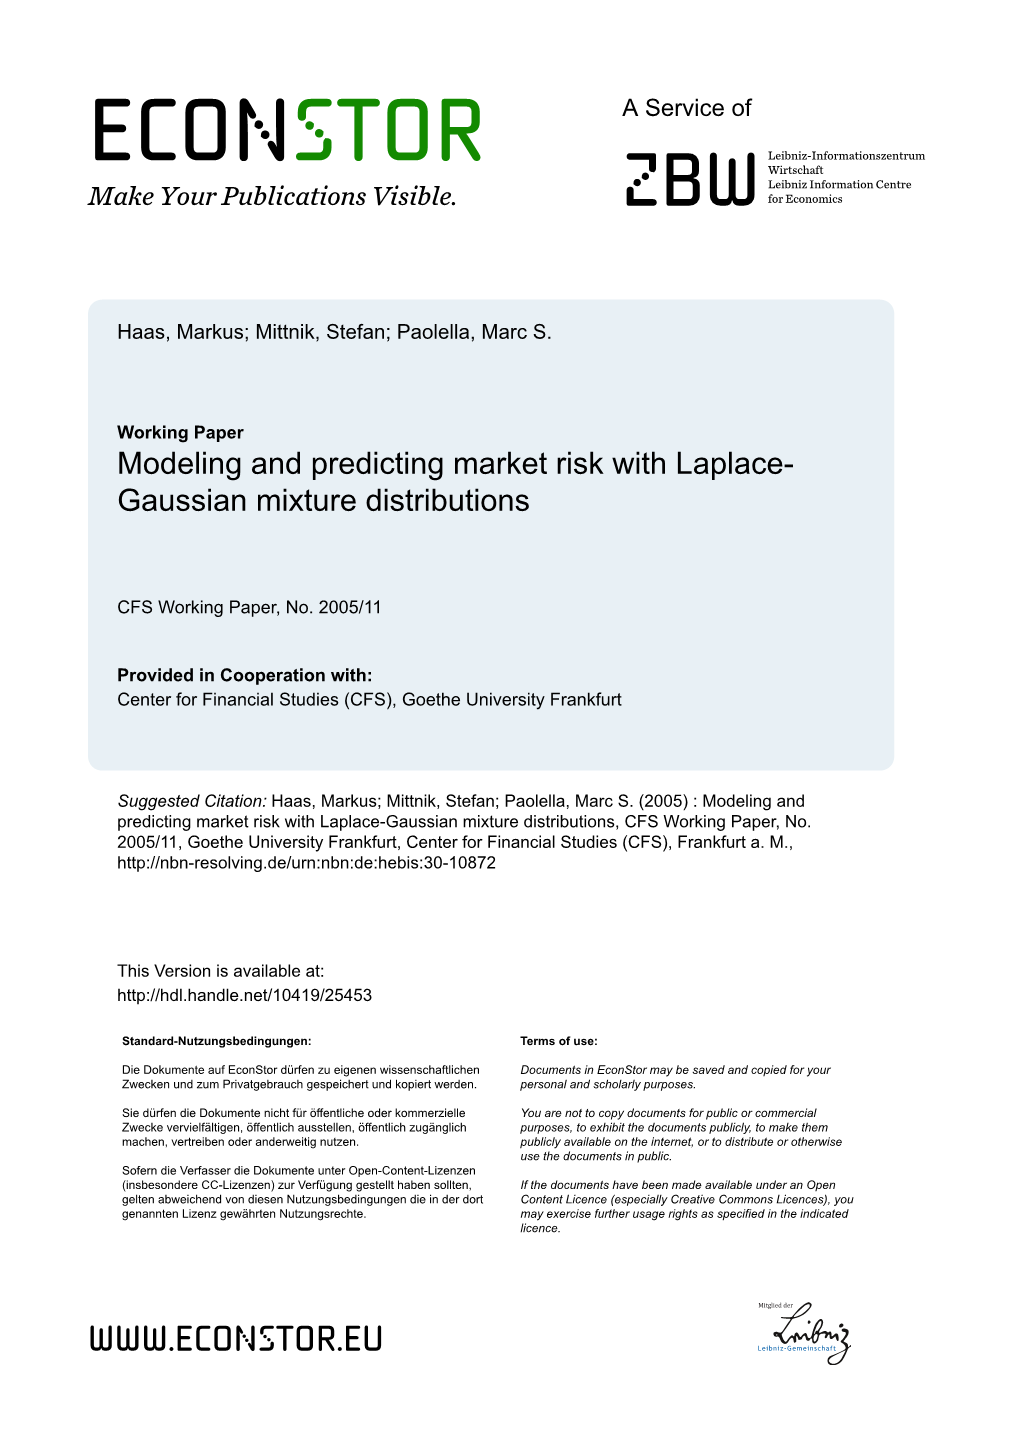 Modeling and Predicting Market Risk with Laplace-Gaussian Mixture Distributions, CFS Working Paper, No